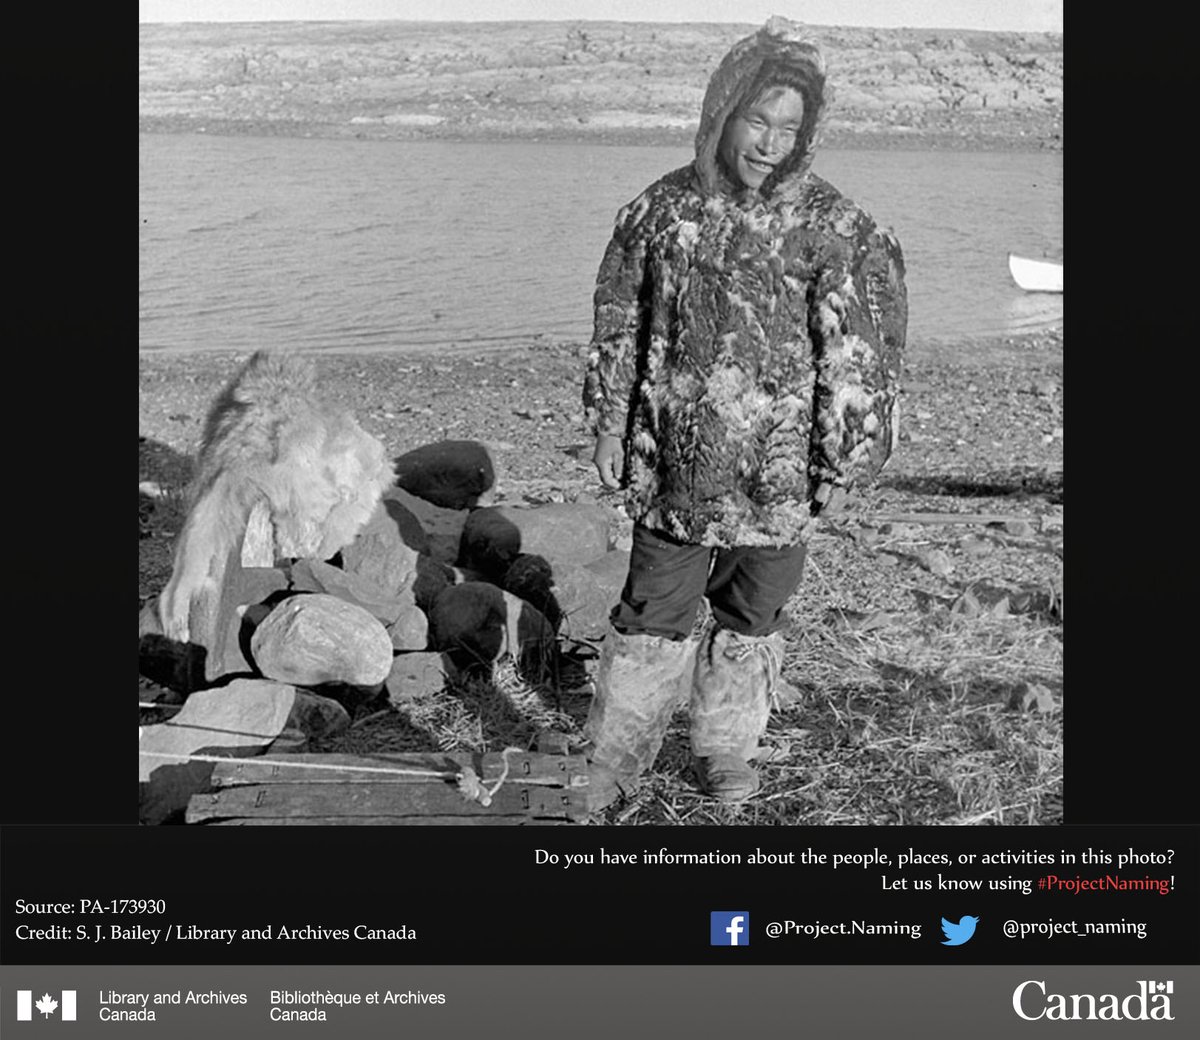 Inuk man wearing a feather parka, possibly made from loon skins, Belcher Islands, Nunavut, 1949. Do you recognize the man in this photo? More on Project Naming and how you can help: ow.ly/I7JH50KJ1BJ